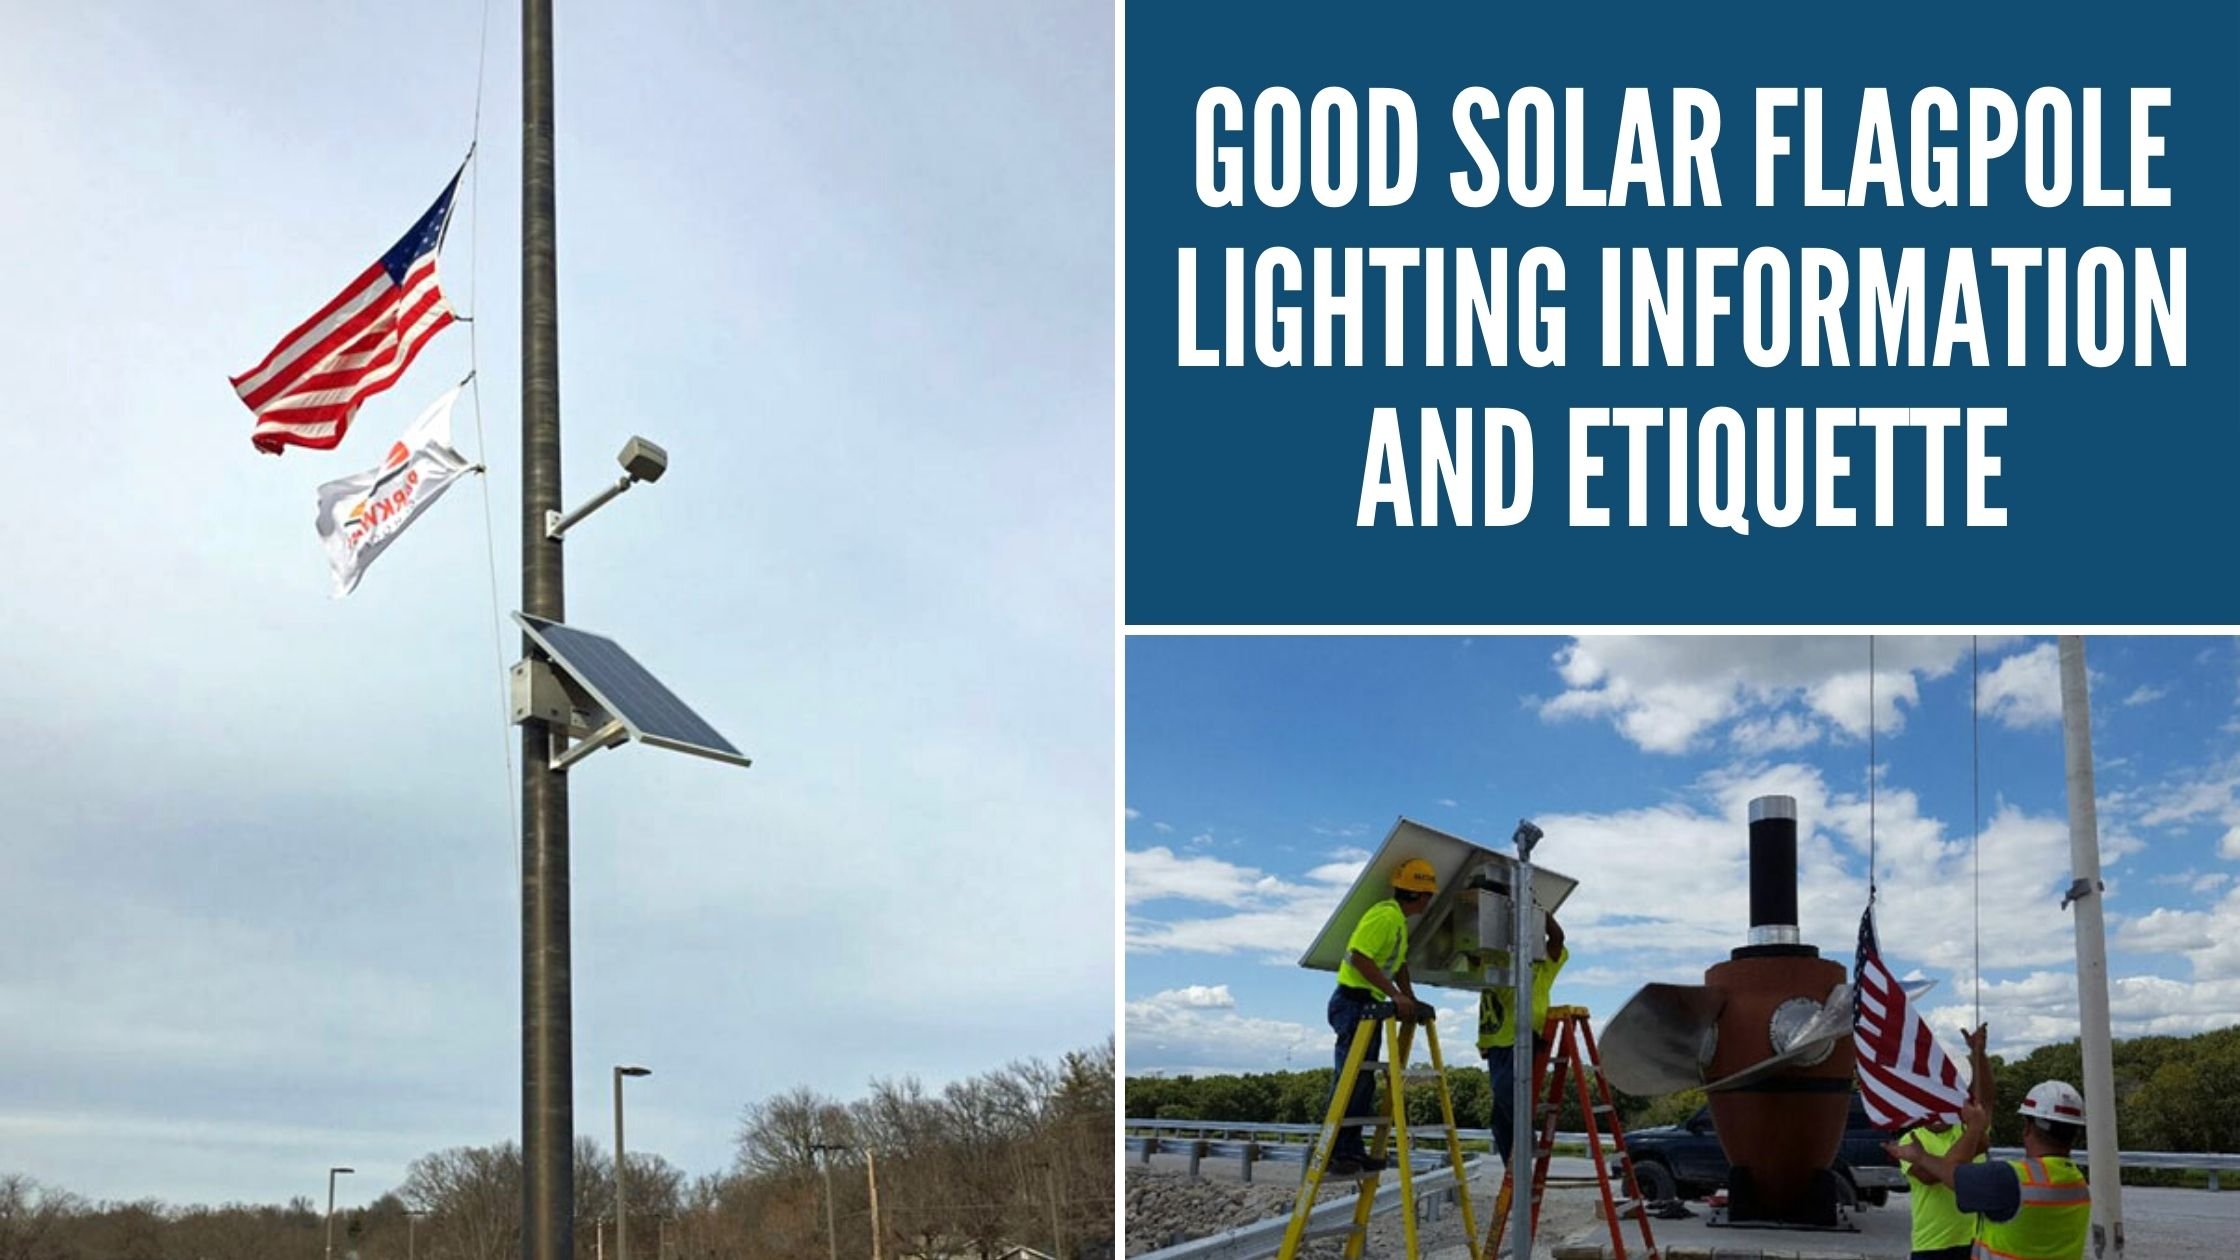 Good Solar Flagpole Lighting Information and Etiquette